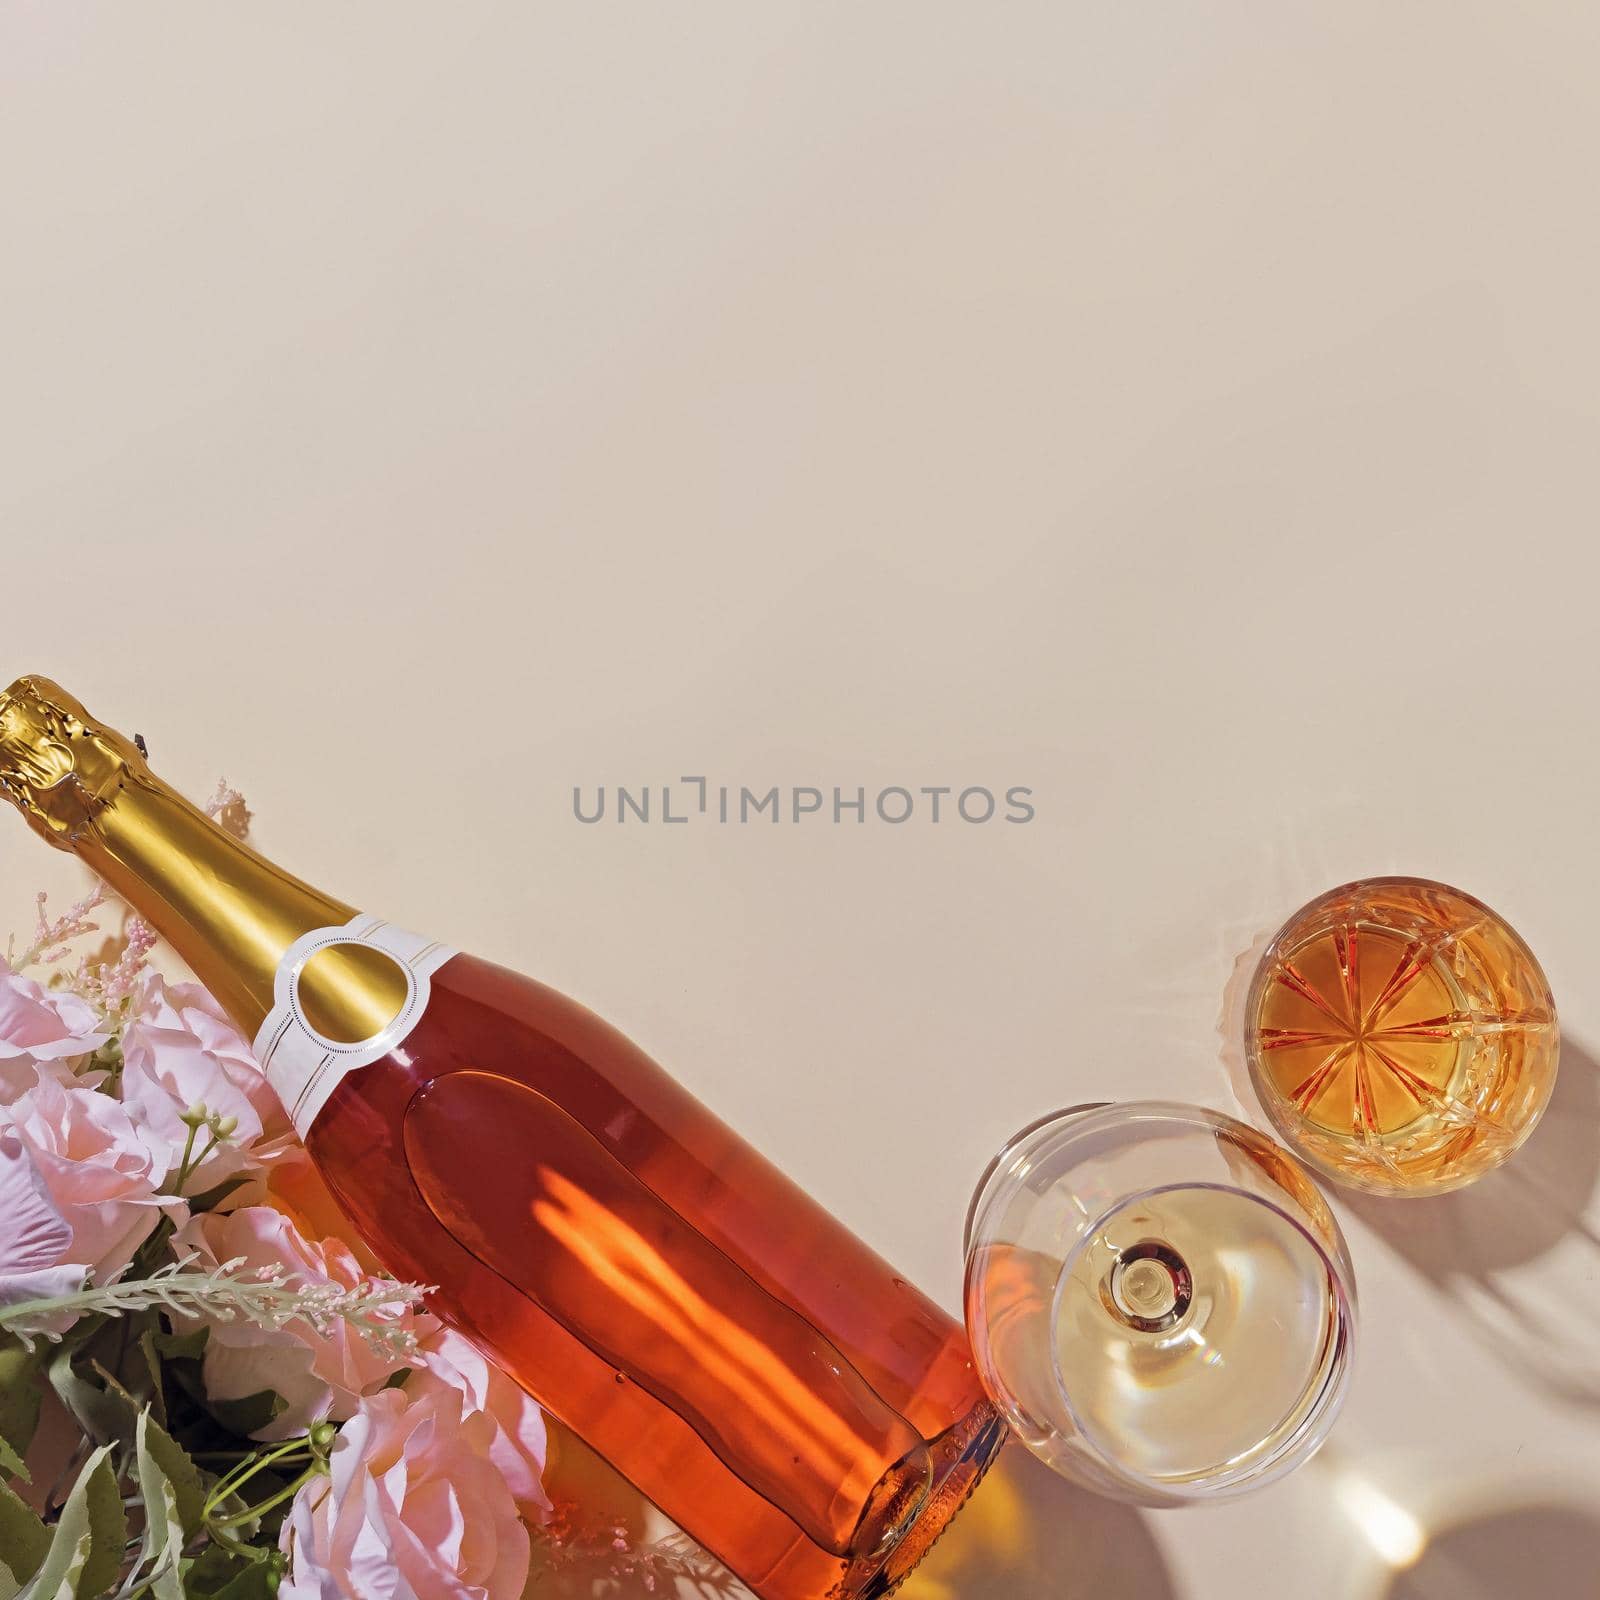 Festive arrangement with flowers and a bottle of champagne next to full two glasses filled with alcoholic drink as birthday or anniversary card with copy space